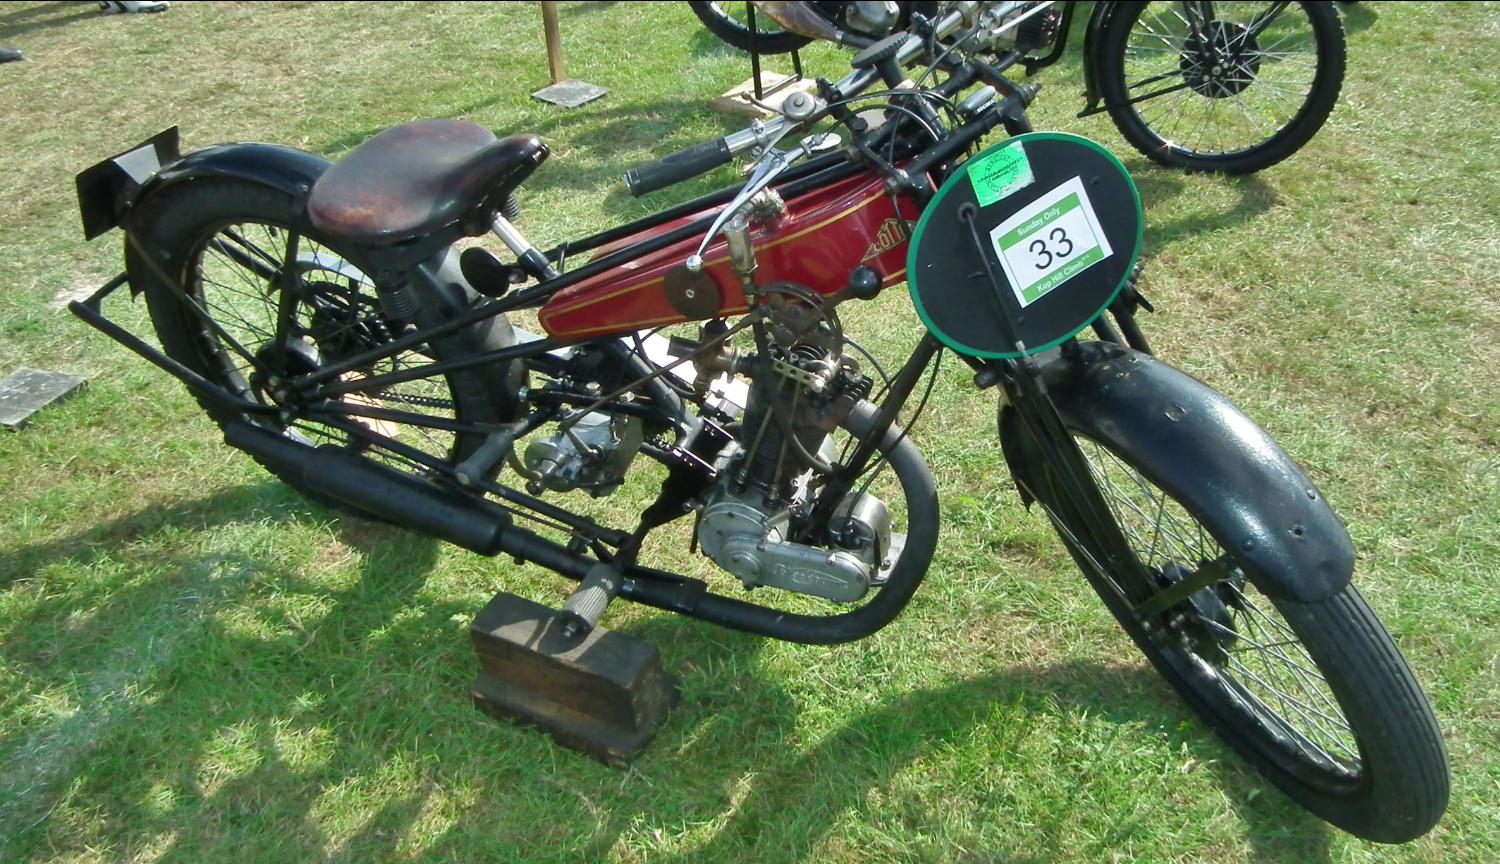 a motorcycle sits in the grass, with other motorcycles behind it